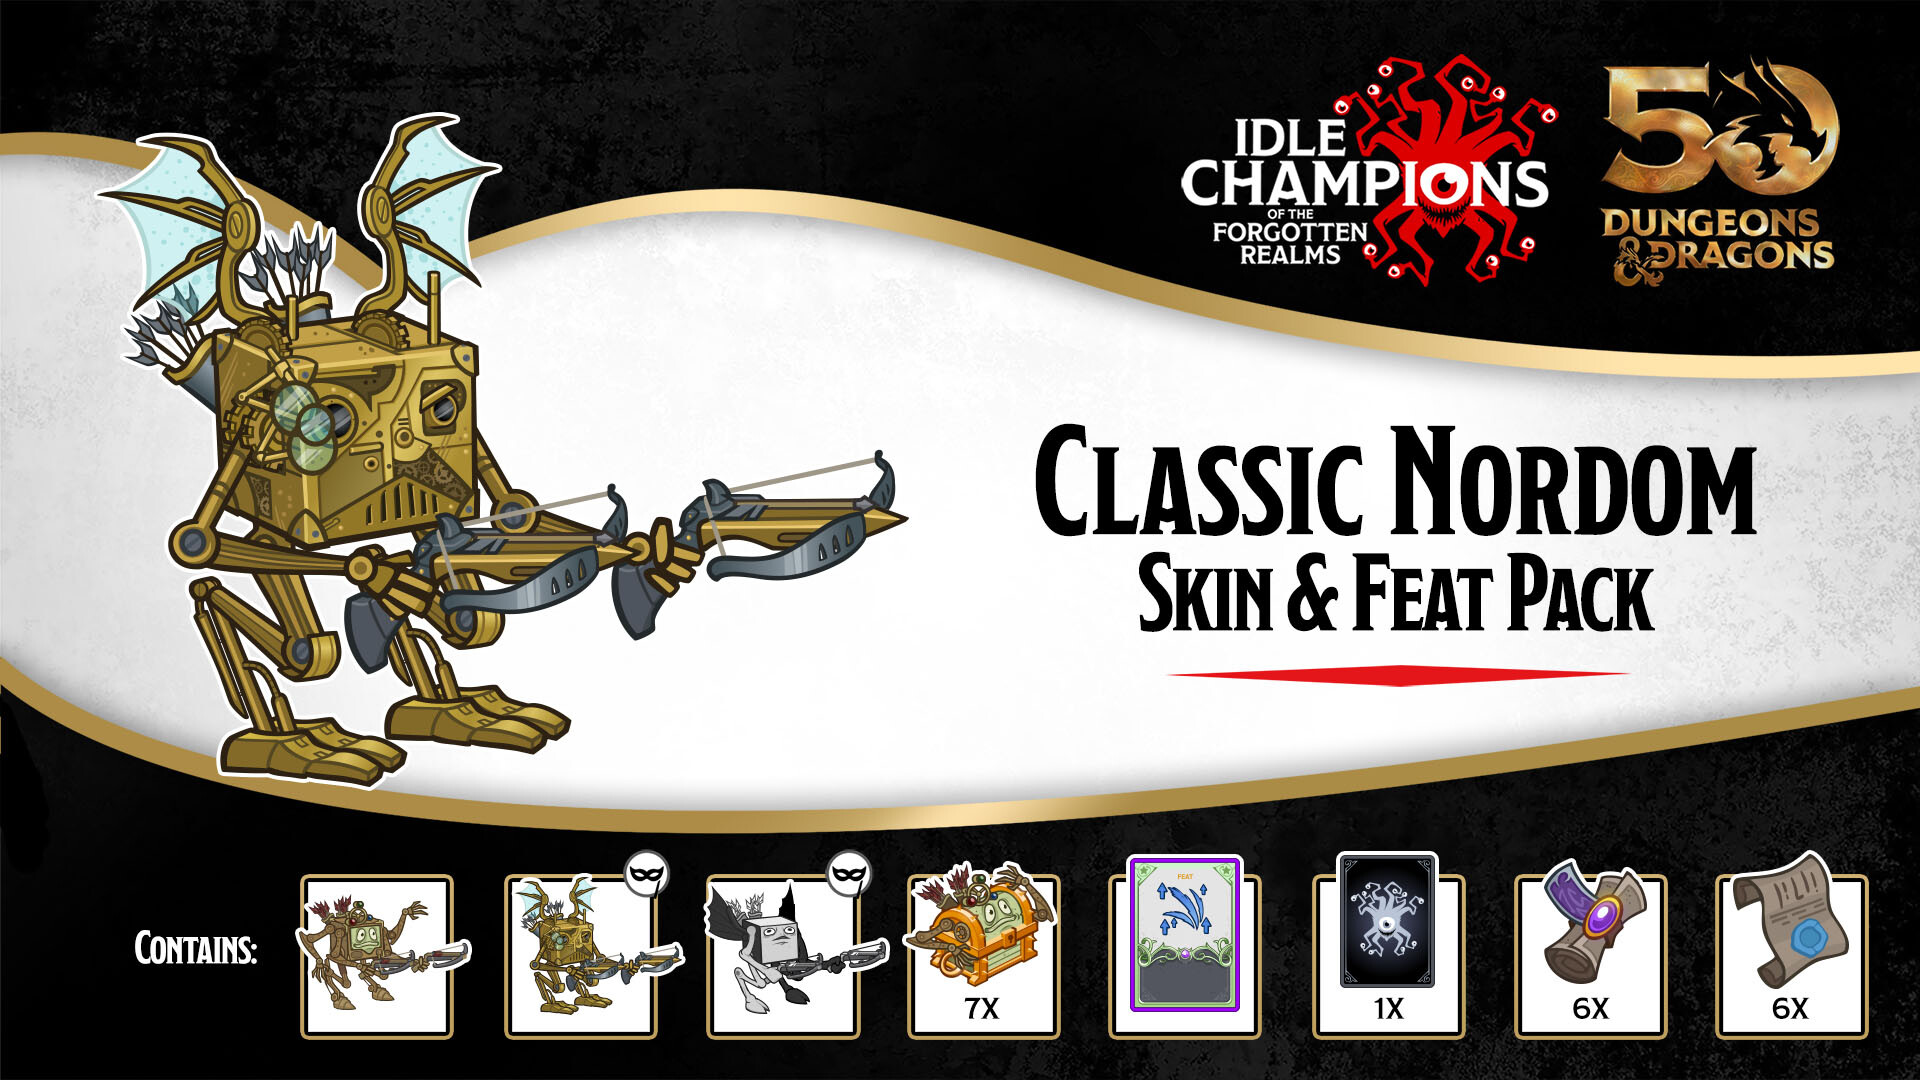 Idle Champions - Classic Nordom Skin & Feat Pack Featured Screenshot #1